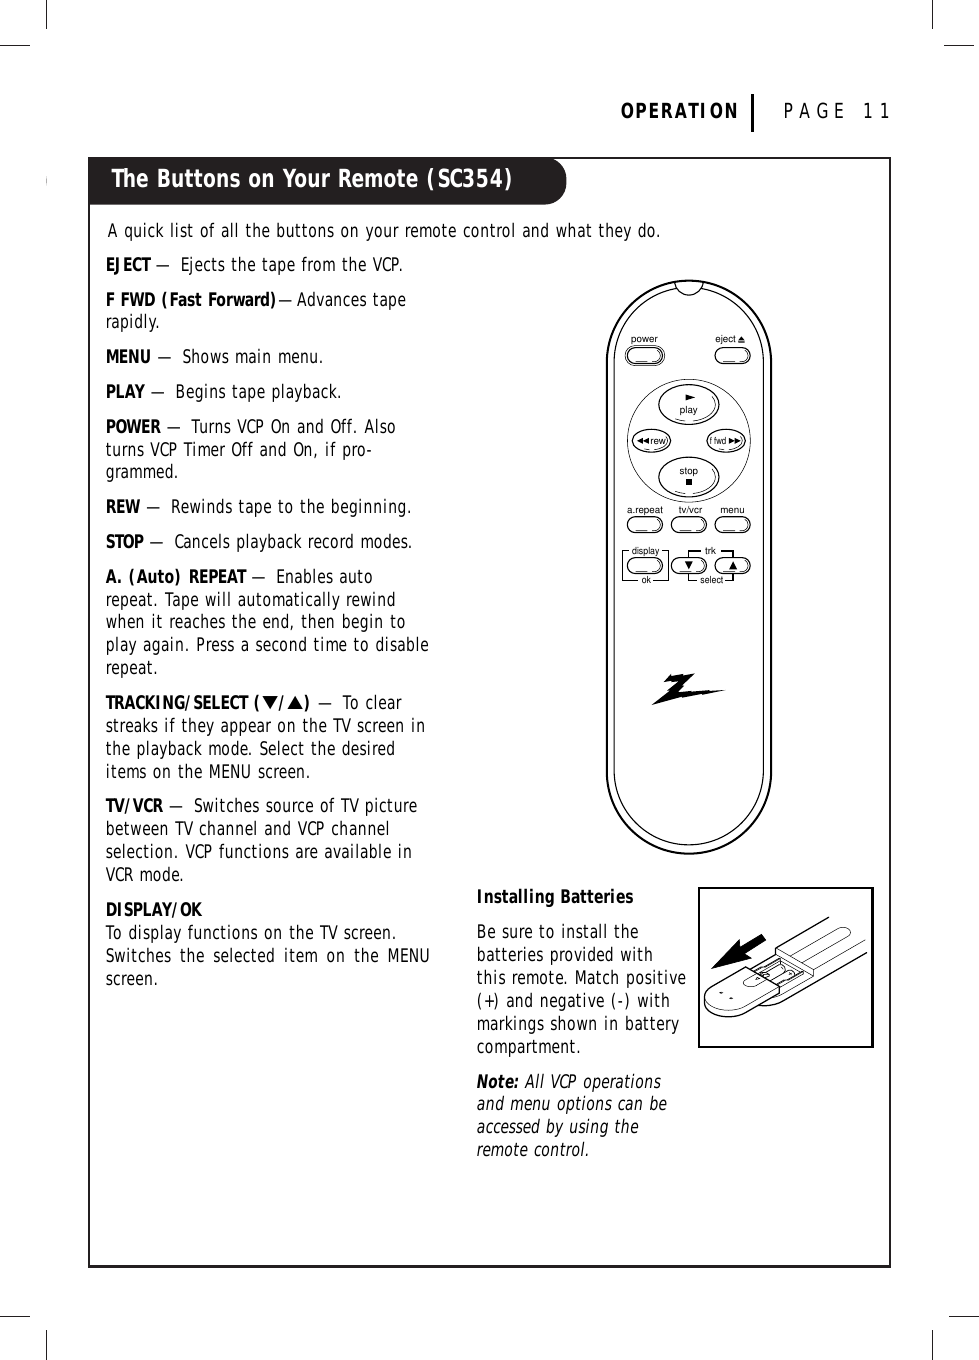 The Buttons on Your Remote (SC354)OPERATION PAGE 11A quick list of all the buttons on your remote control and what they do.Installing BatteriesBe sure to install the batteries provided withthis remote. Match positive(+) and negative (-) with markings shown in battery compartment.Note: All VCP operationsand menu options can beaccessed by using theremote control.EJECT — Ejects the tape from the VCP.F FWD (Fast Forward)—Advances taperapidly.MENU — Shows main menu.PLAY — Begins tape playback.POWER — Turns VCP On and Off. Alsoturns VCP Timer Off and On, if pro-grammed.REW — Rewinds tape to the beginning.STOP — Cancels playback record modes.A. (Auto) REPEAT — Enables autorepeat. Tape will automatically rewindwhen it reaches the end, then begin toplay again. Press a second time to disablerepeat.TRACKING/SELECT (▼/▲)— To clearstreaks if they appear on the TV screen inthe playback mode. Select the desireditems on the MENU screen.TV/VCR — Switches source of TV picturebetween TV channel and VCP channelselection. VCP functions are available inVCR mode.DISPLAY/OKTo display functions on the TV screen.Switches the selected item on the MENUscreen.ejectpowerplaystoprewf fwdtv/vcra.repeat menutrkselectdisplayok